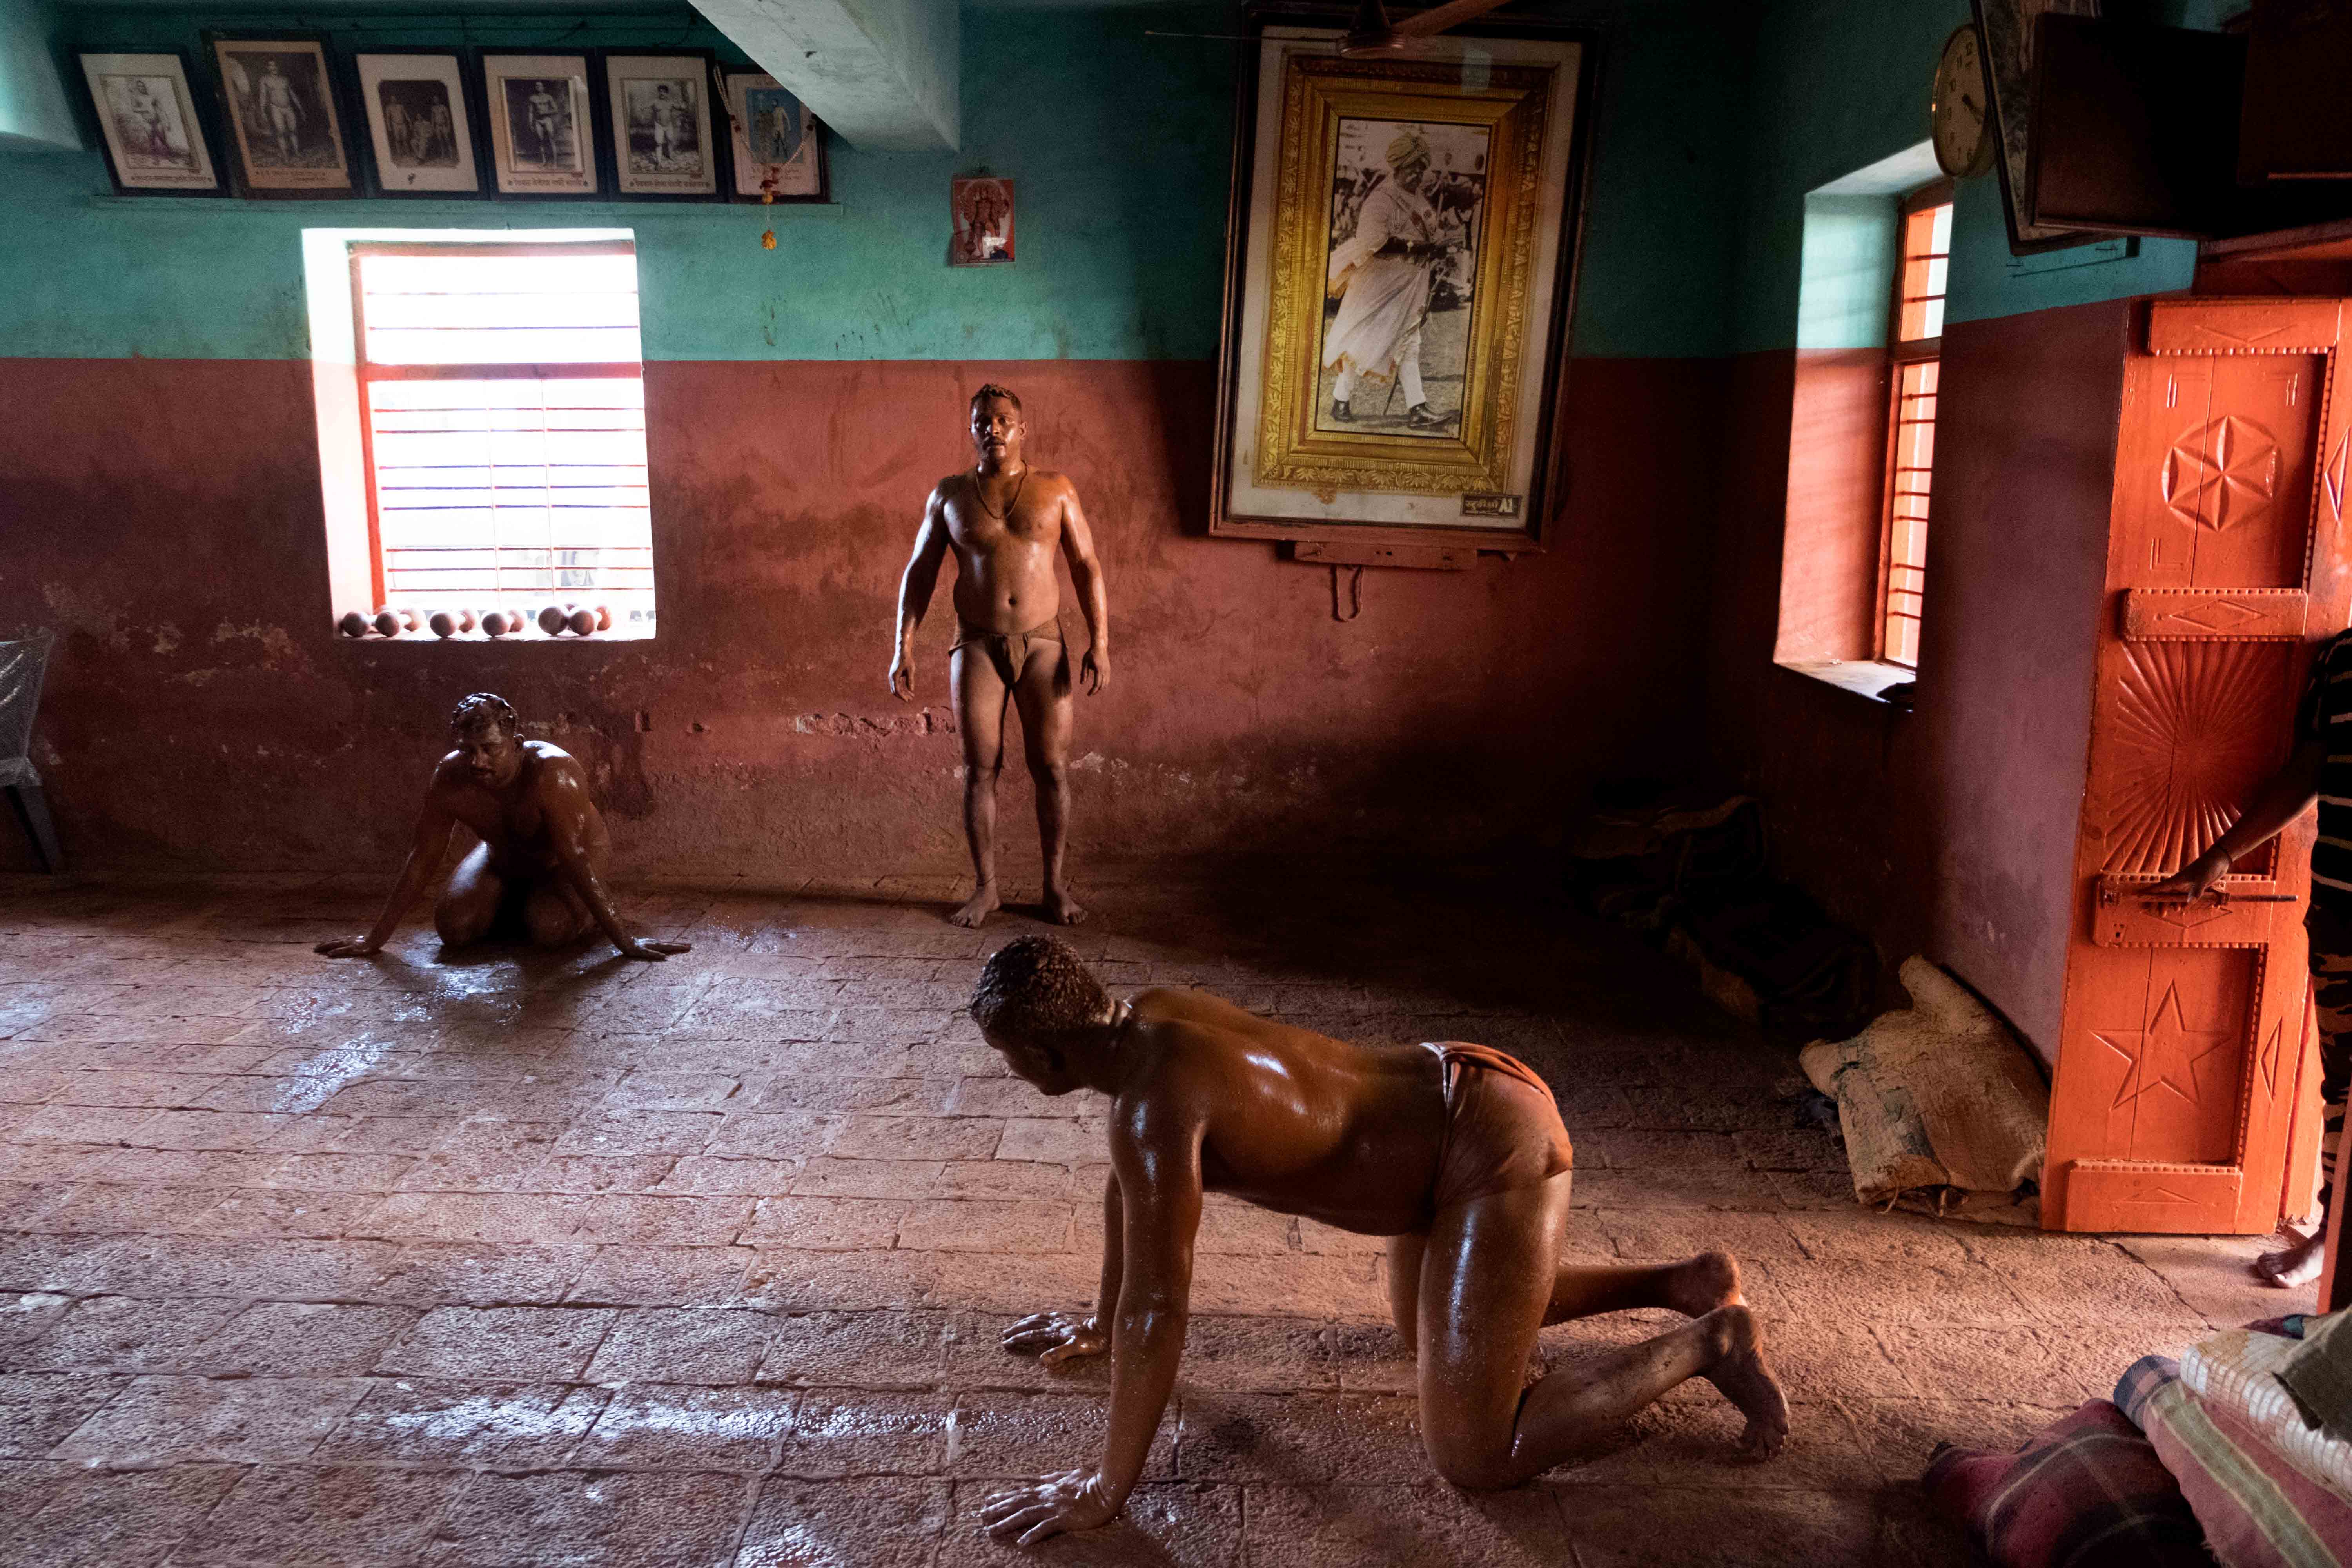 Wrestlers warming up in Shahupuri Akhara in front of a large portrait of Chhatrapati Shahu Maharaj, the King of Kolhapur who is credited with popularising wrestling in his princely state. Photograph by Indrajit Khambe ©Sahapedia 